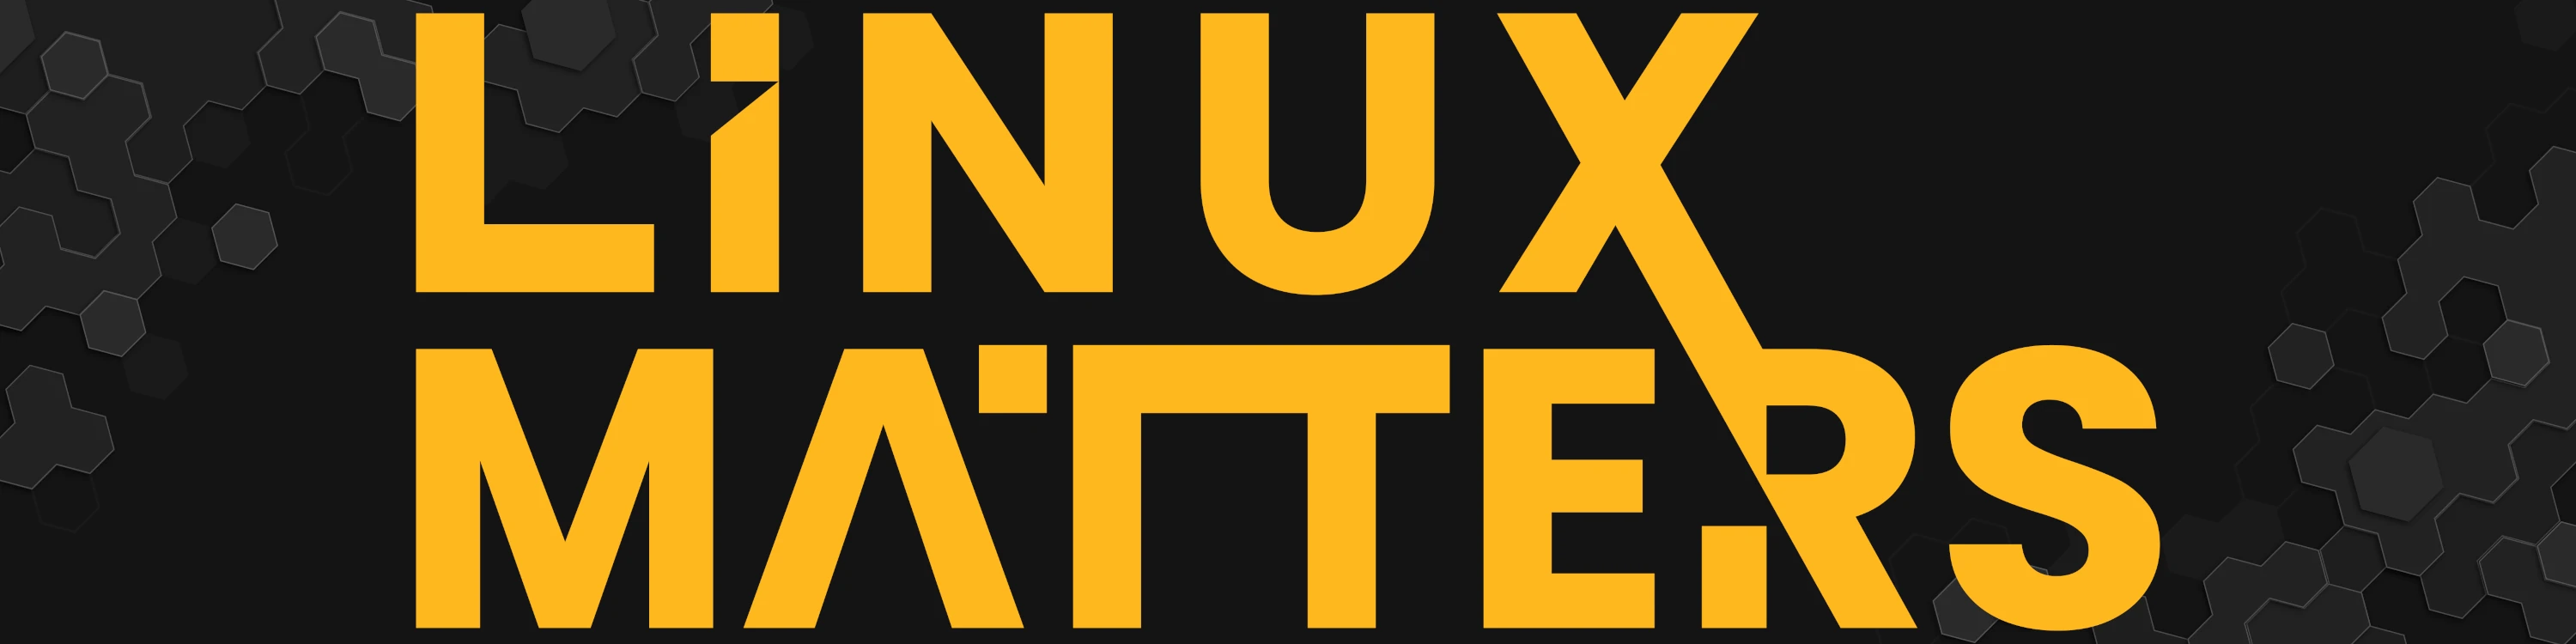 Linux Matters Podcast